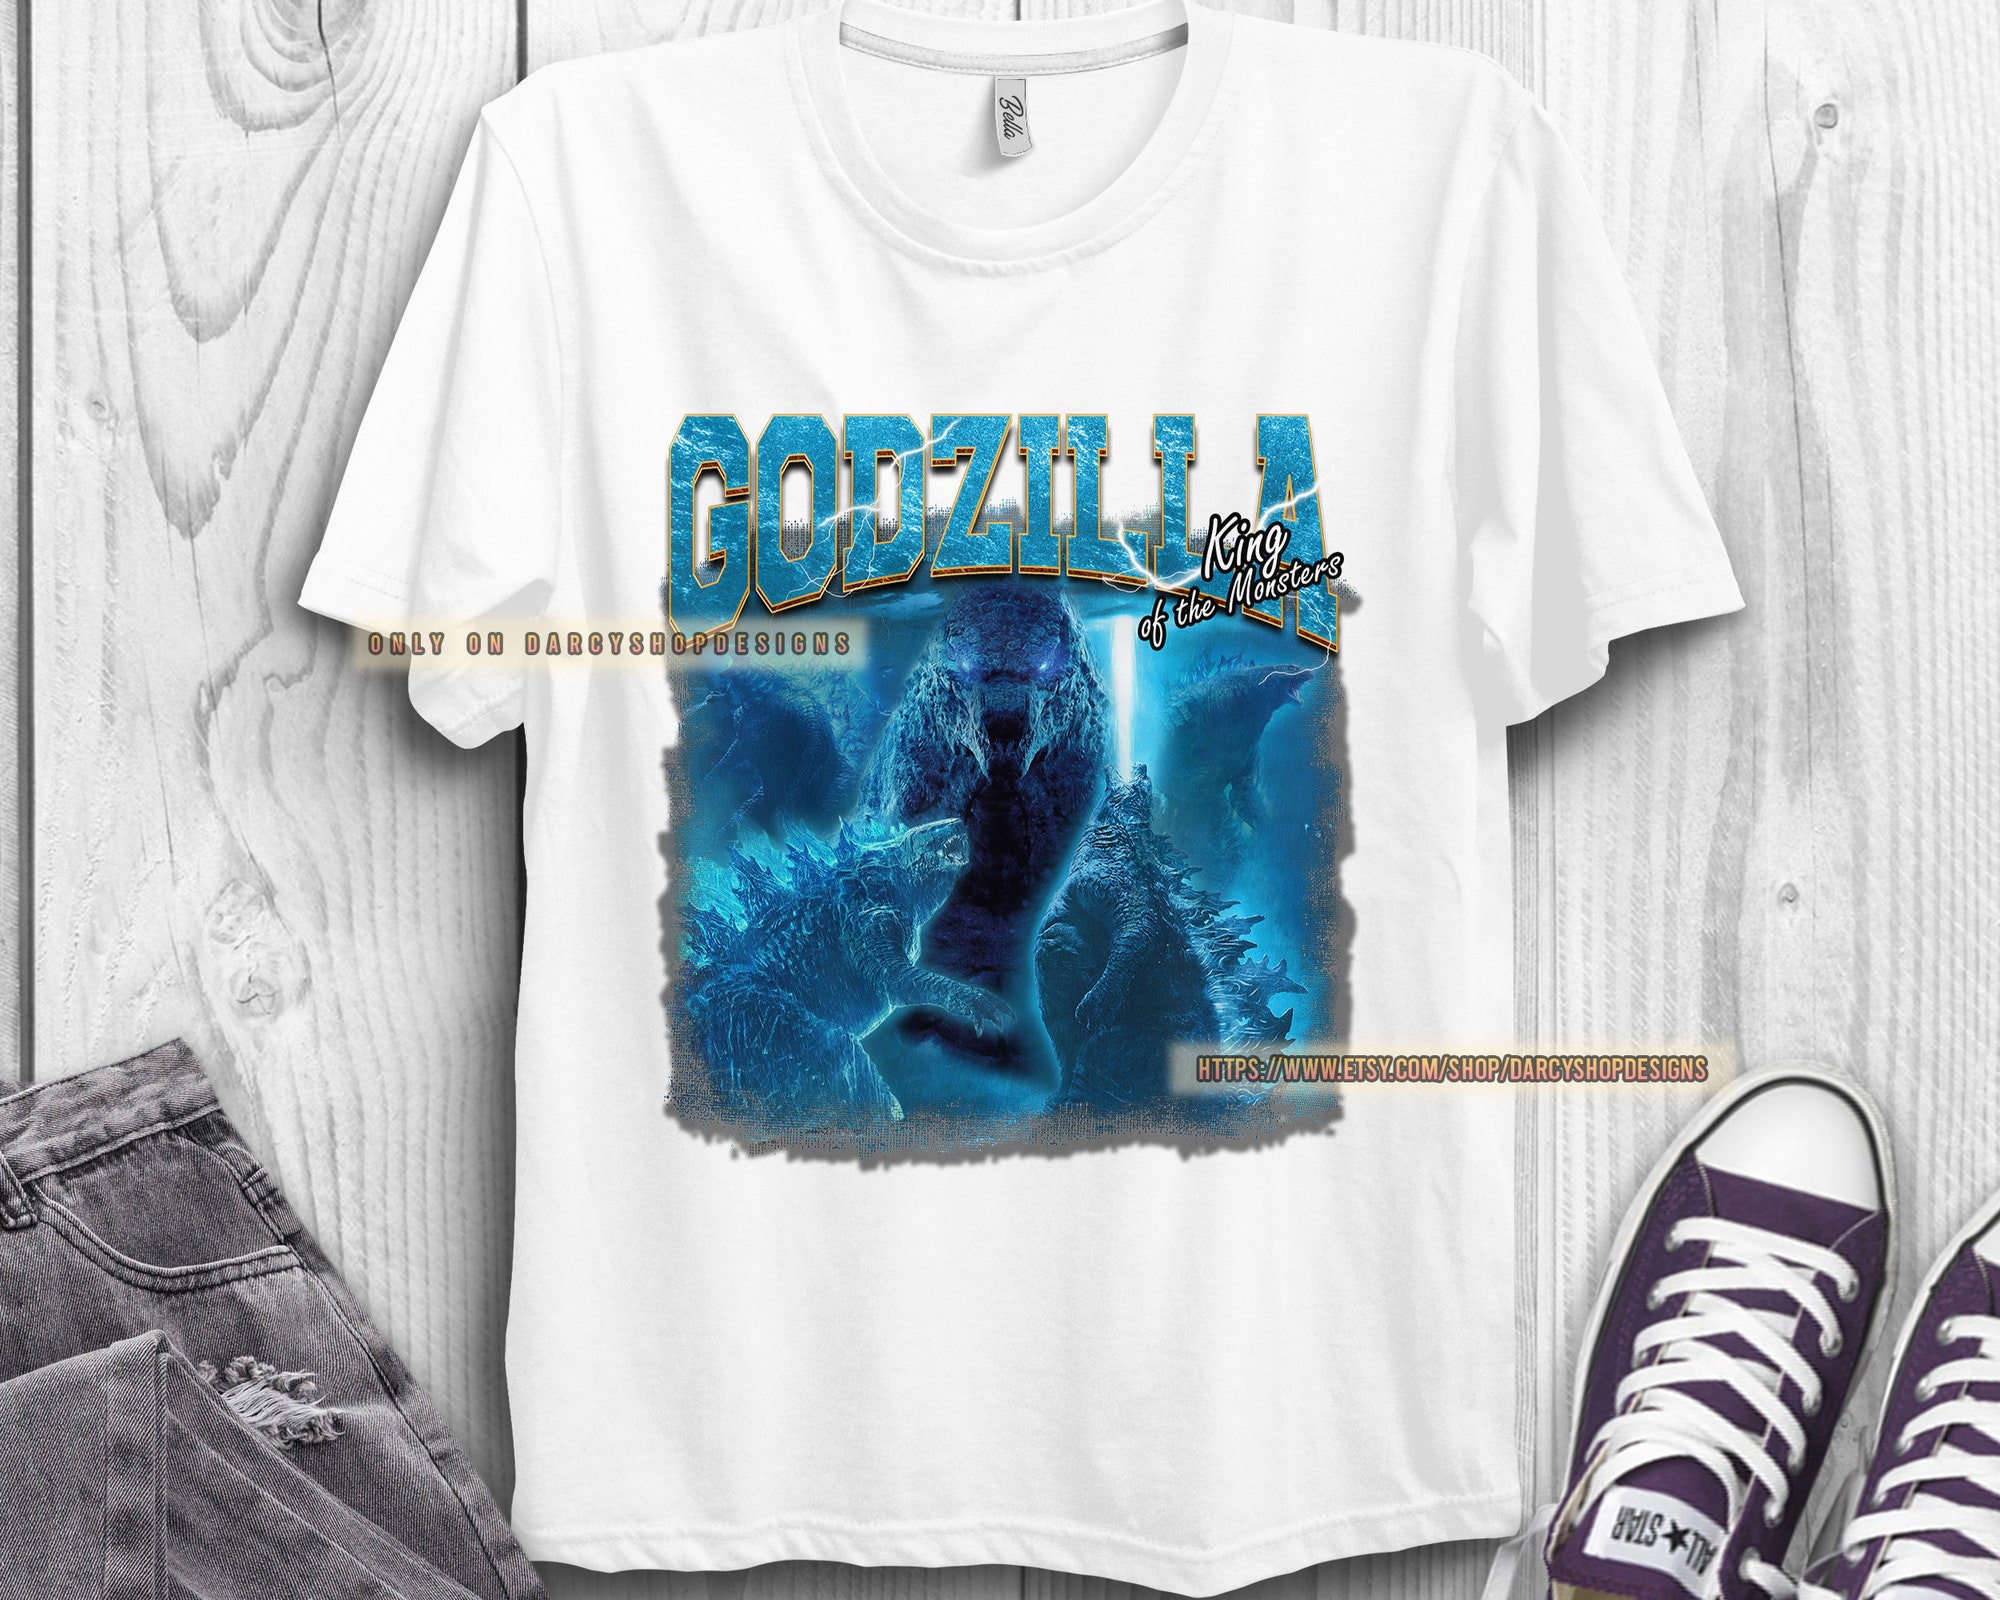 Discover Godzilla Graphic Poster King Of The Monsters Shirt Unisex T-shirt Kid Tee Adult Shirt Toddler Tee Infant Shirt